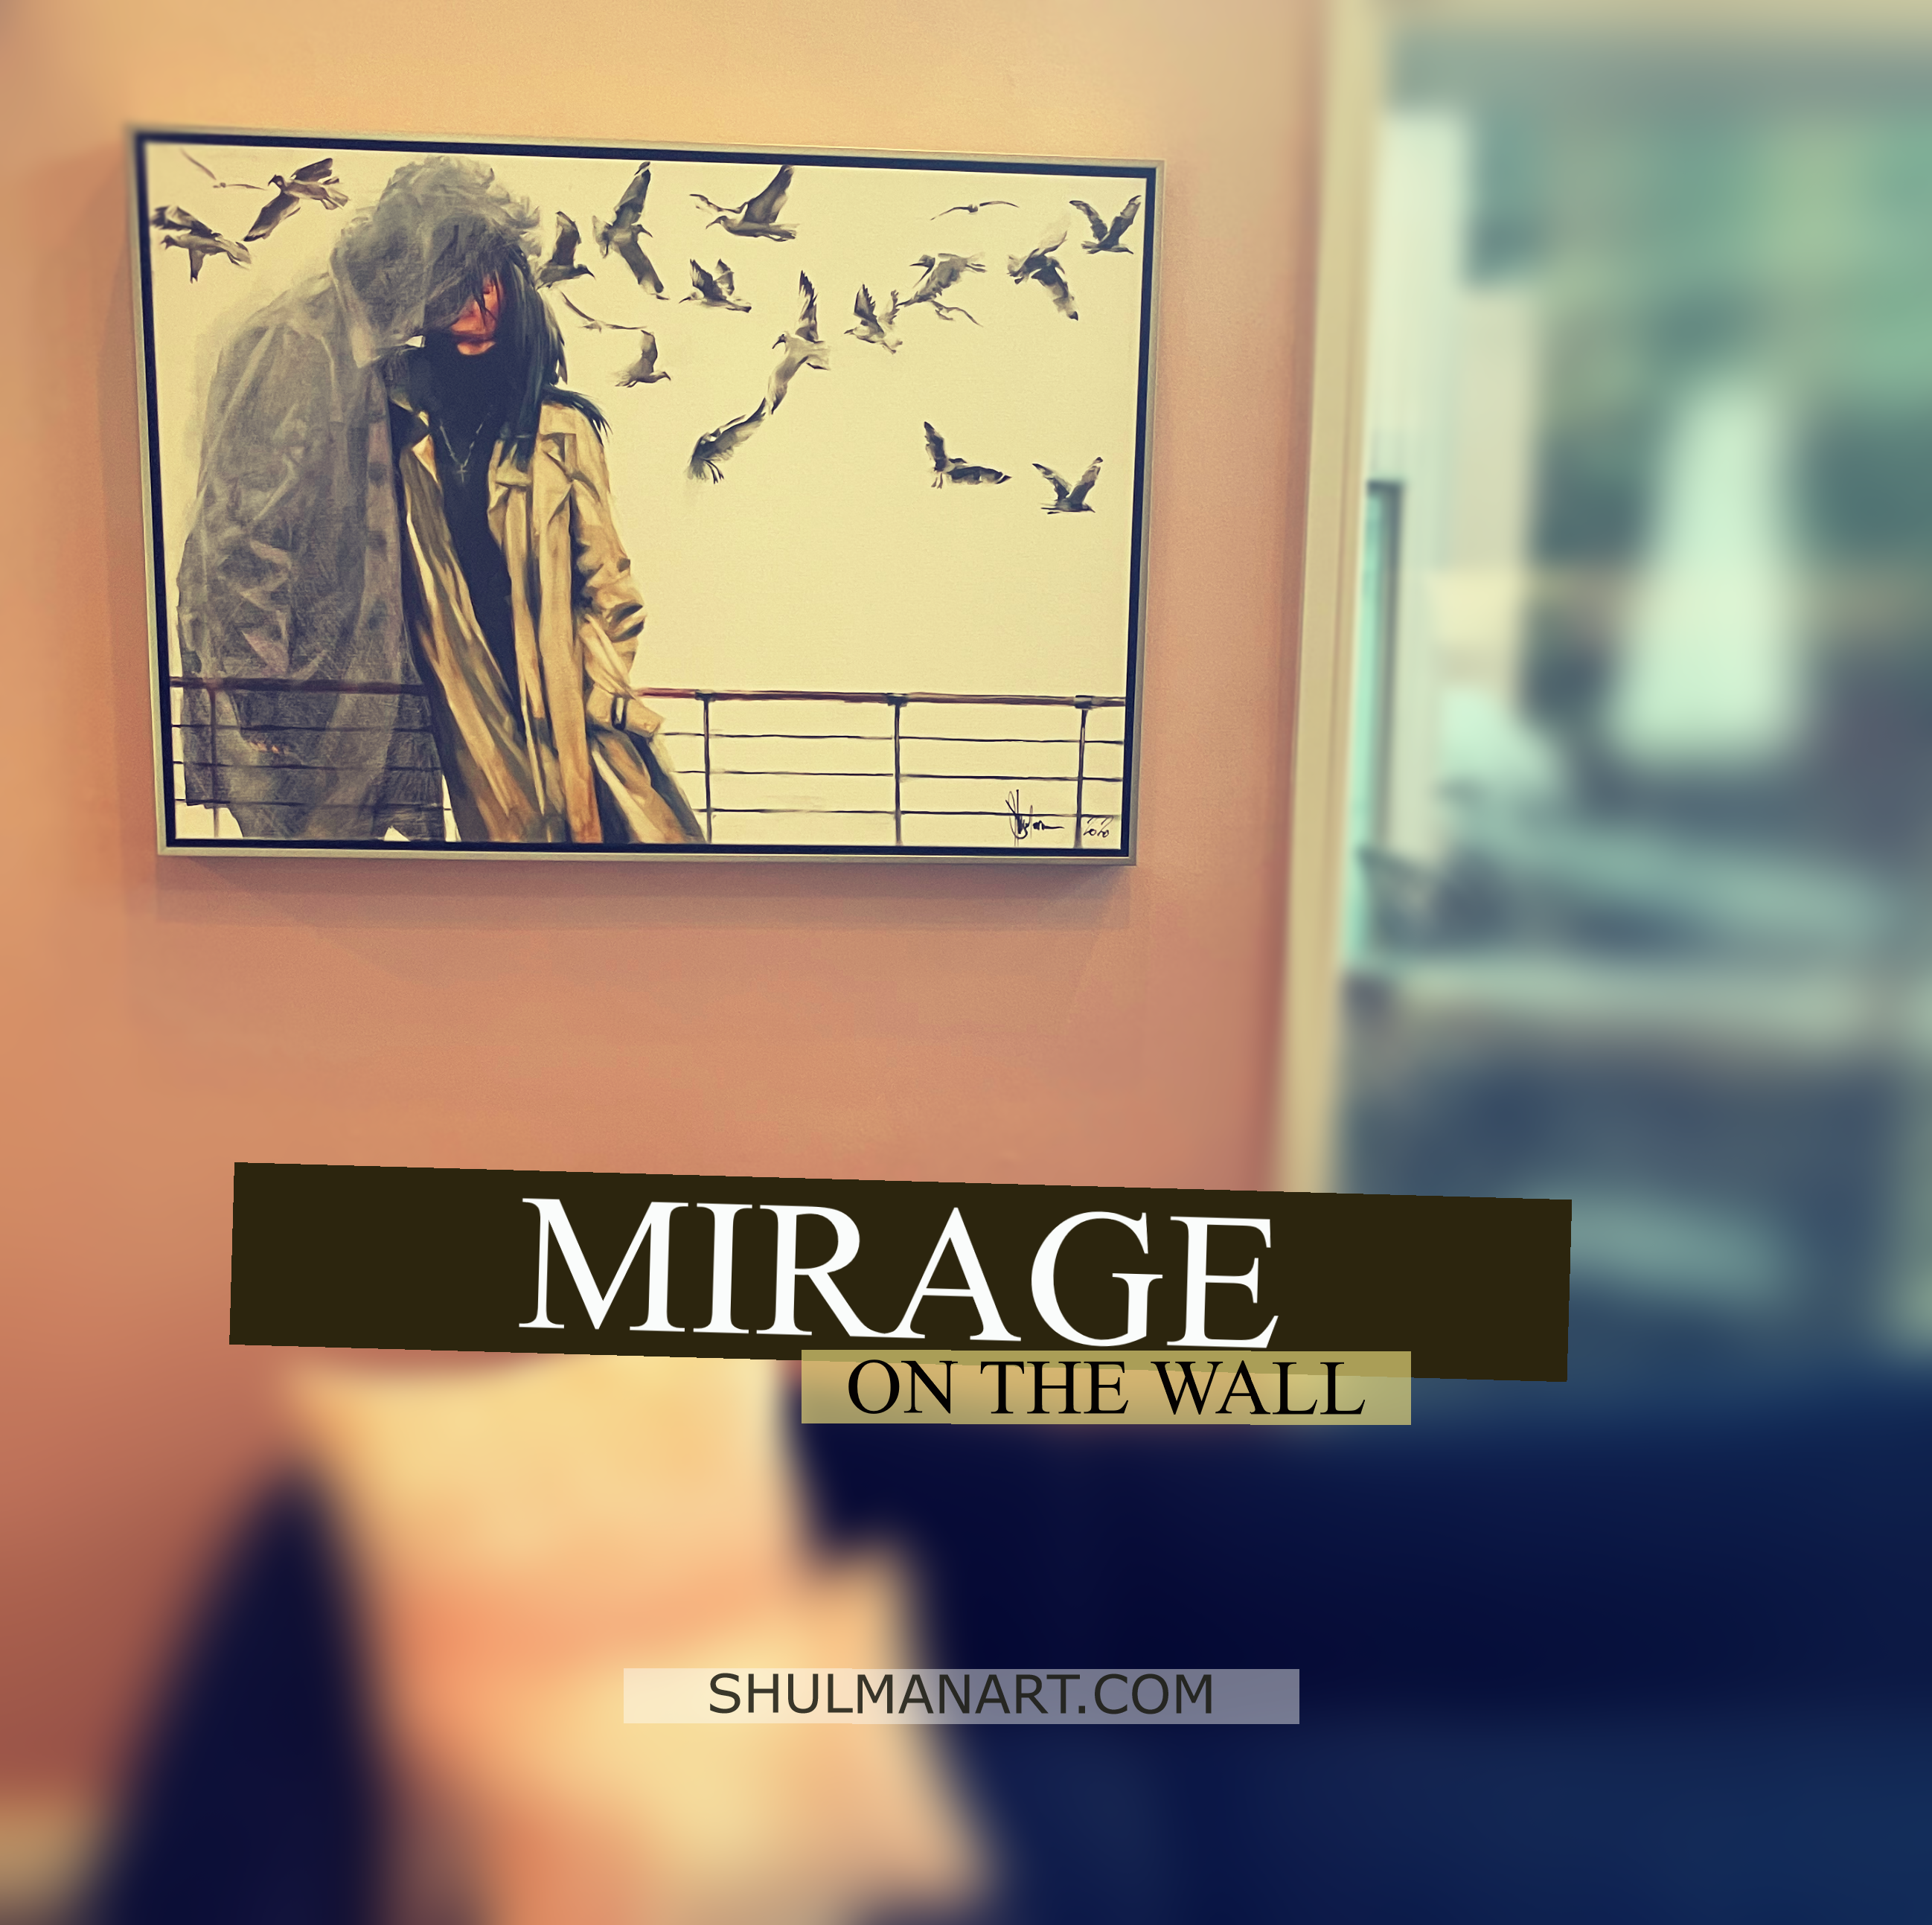 The Mirage Oil Painting Hung on the Wall